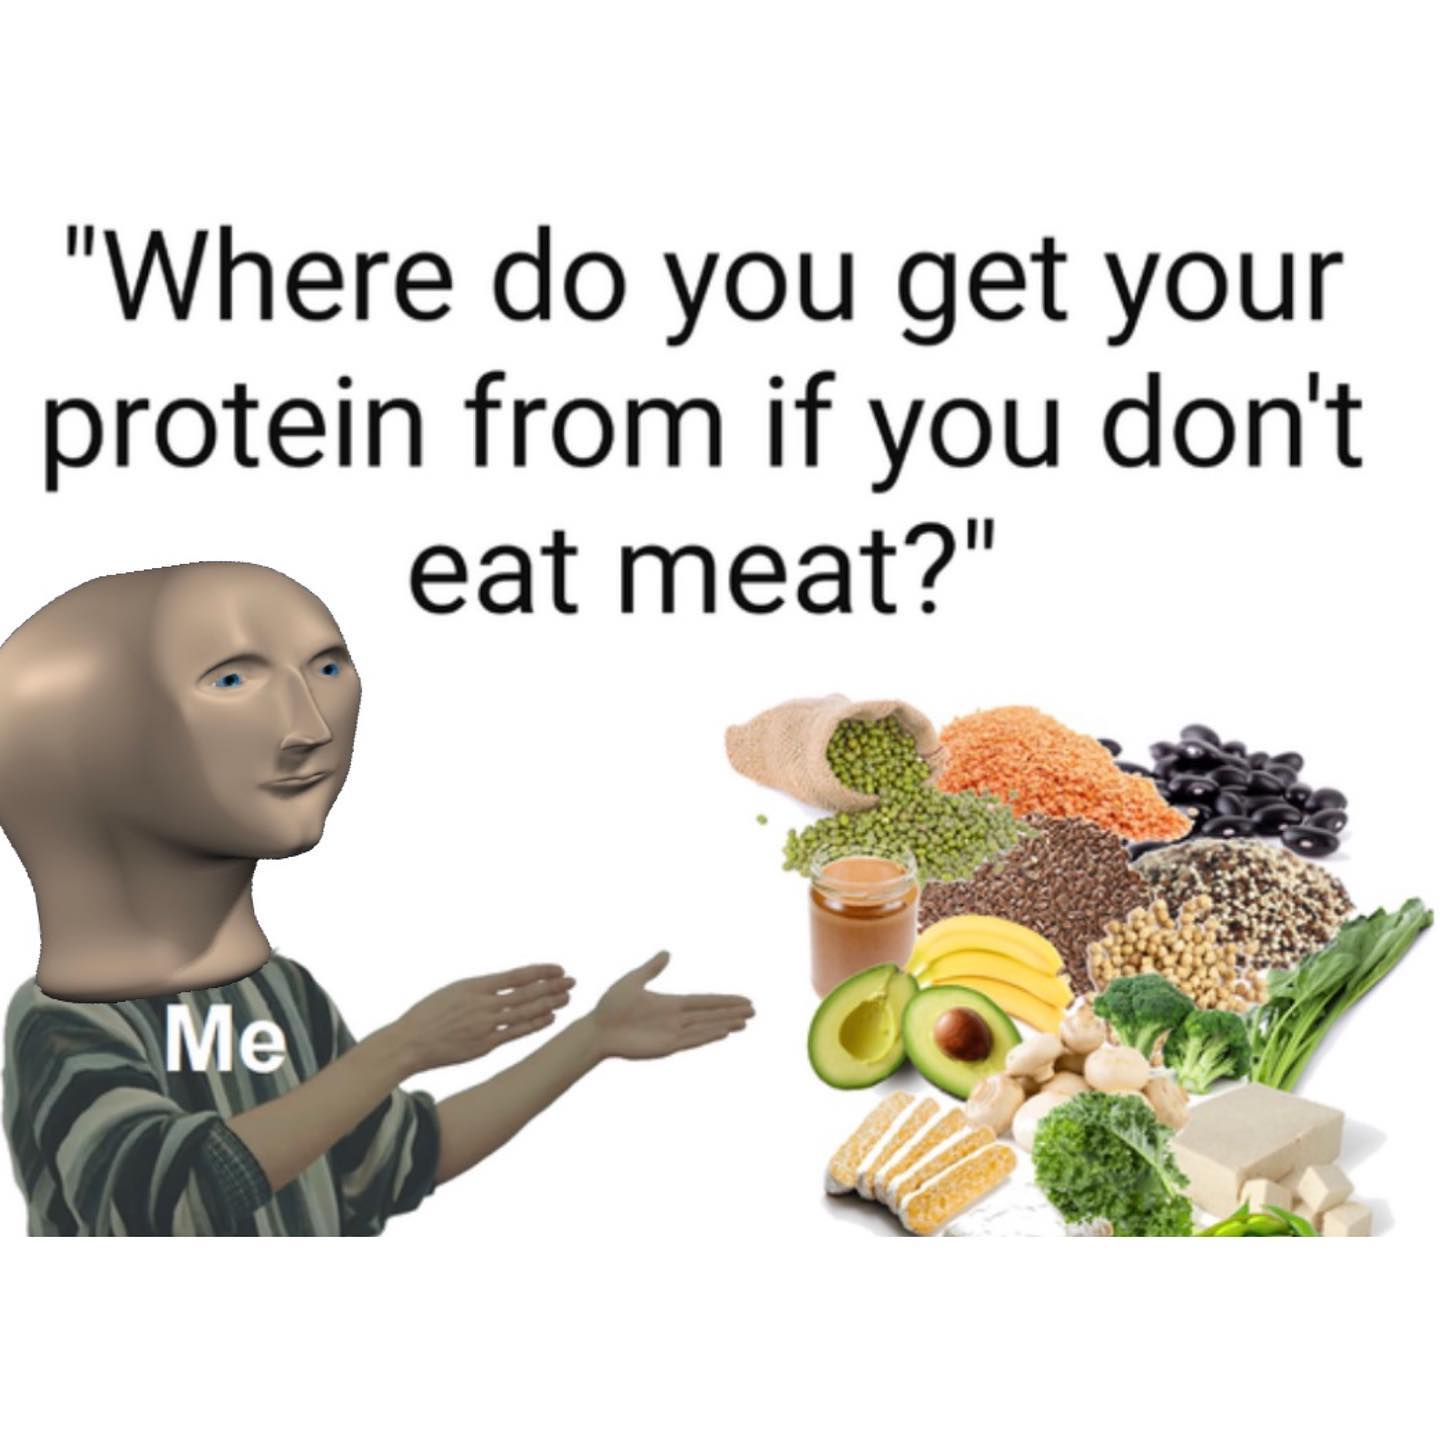 dank memes - natural foods - "Where do you get your protein from if you don't eat meat?" Me a